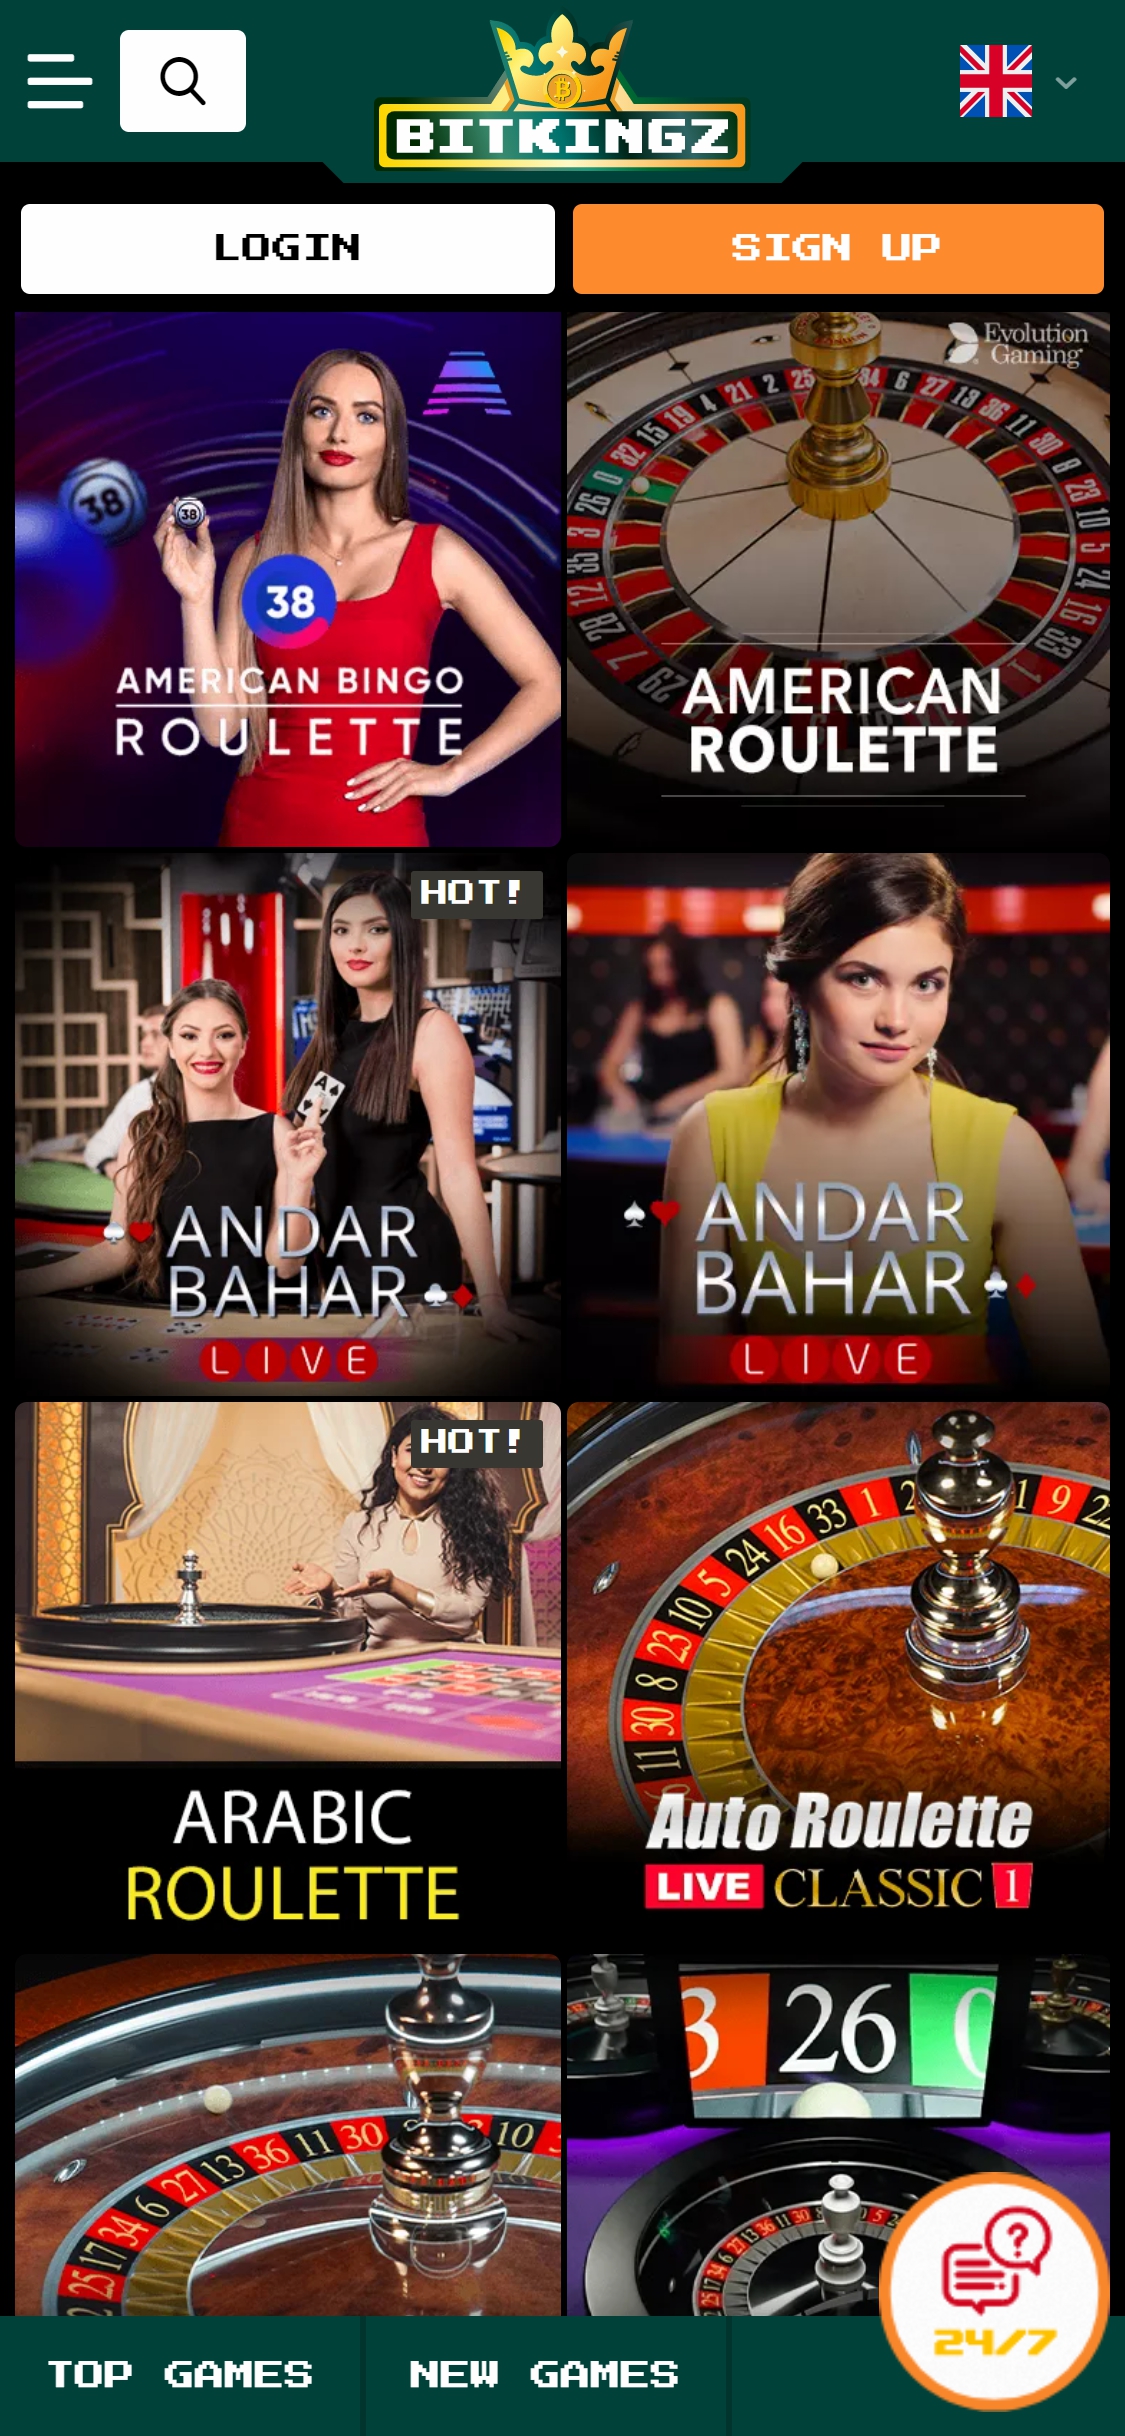 Bitkingz Casino Mobile Live Dealer Games Review